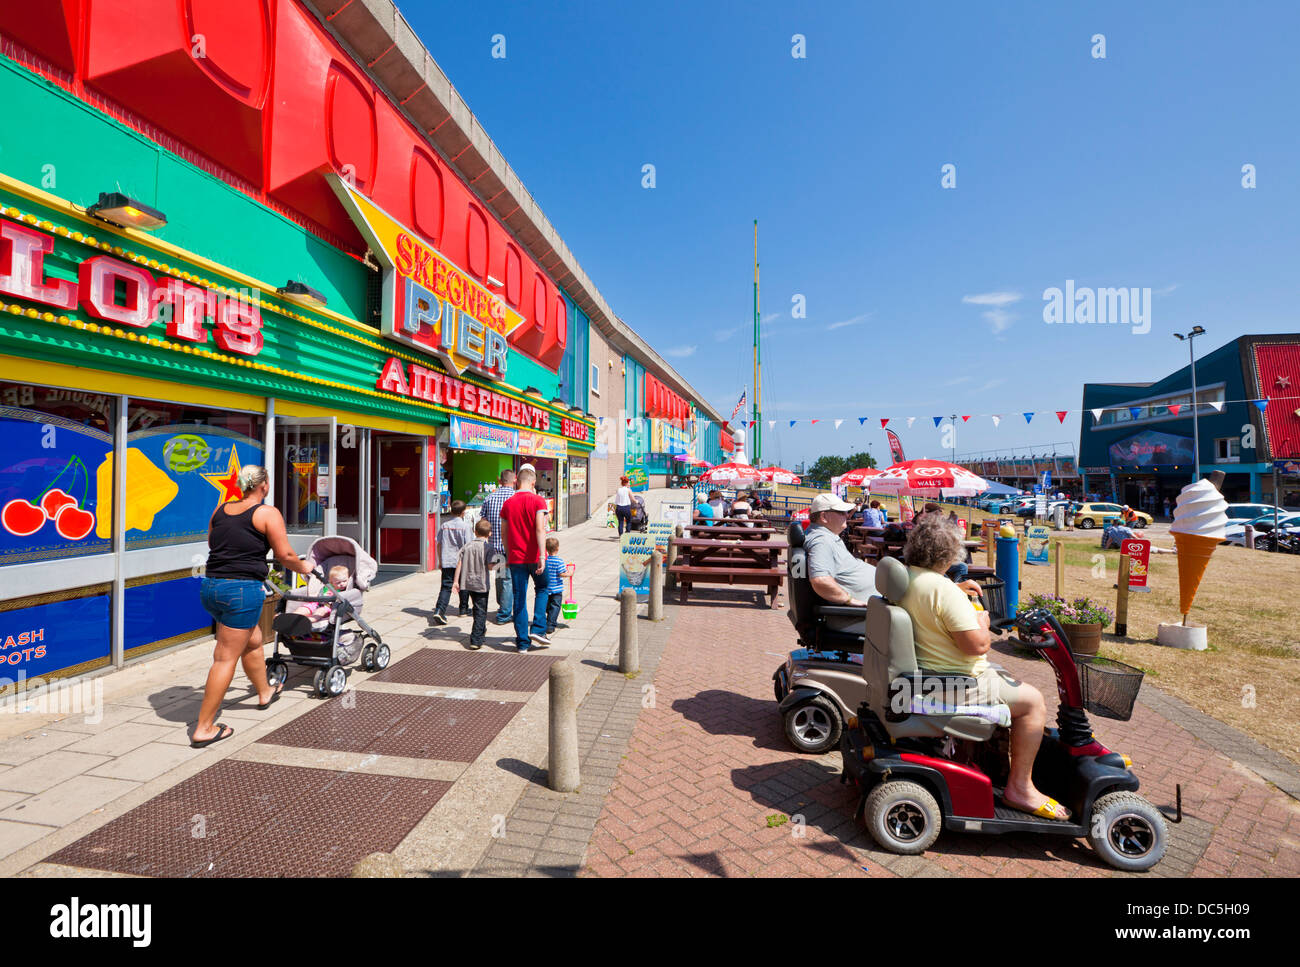 Disabled tourists sat outside the entrance to Skegness Pier Amusement arcade Lincolnshire england UK GB EU Europe Stock Photo